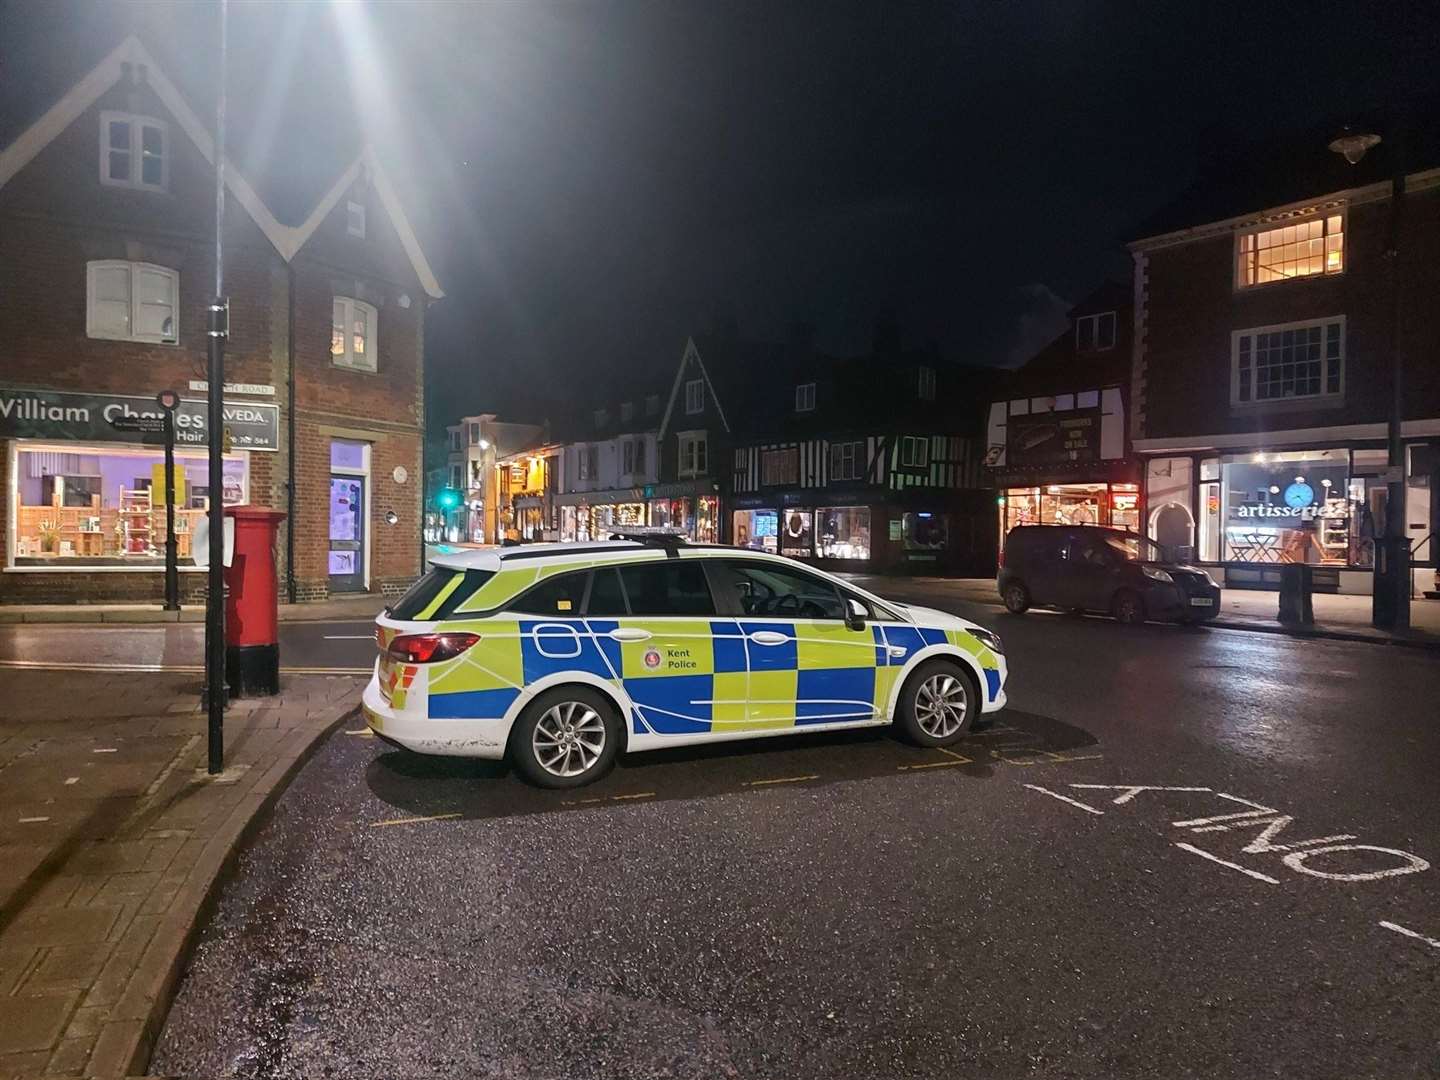 Kent Police moved to reassure Tenterden residents following a spate of thefts in the town. Photo: Kent Police